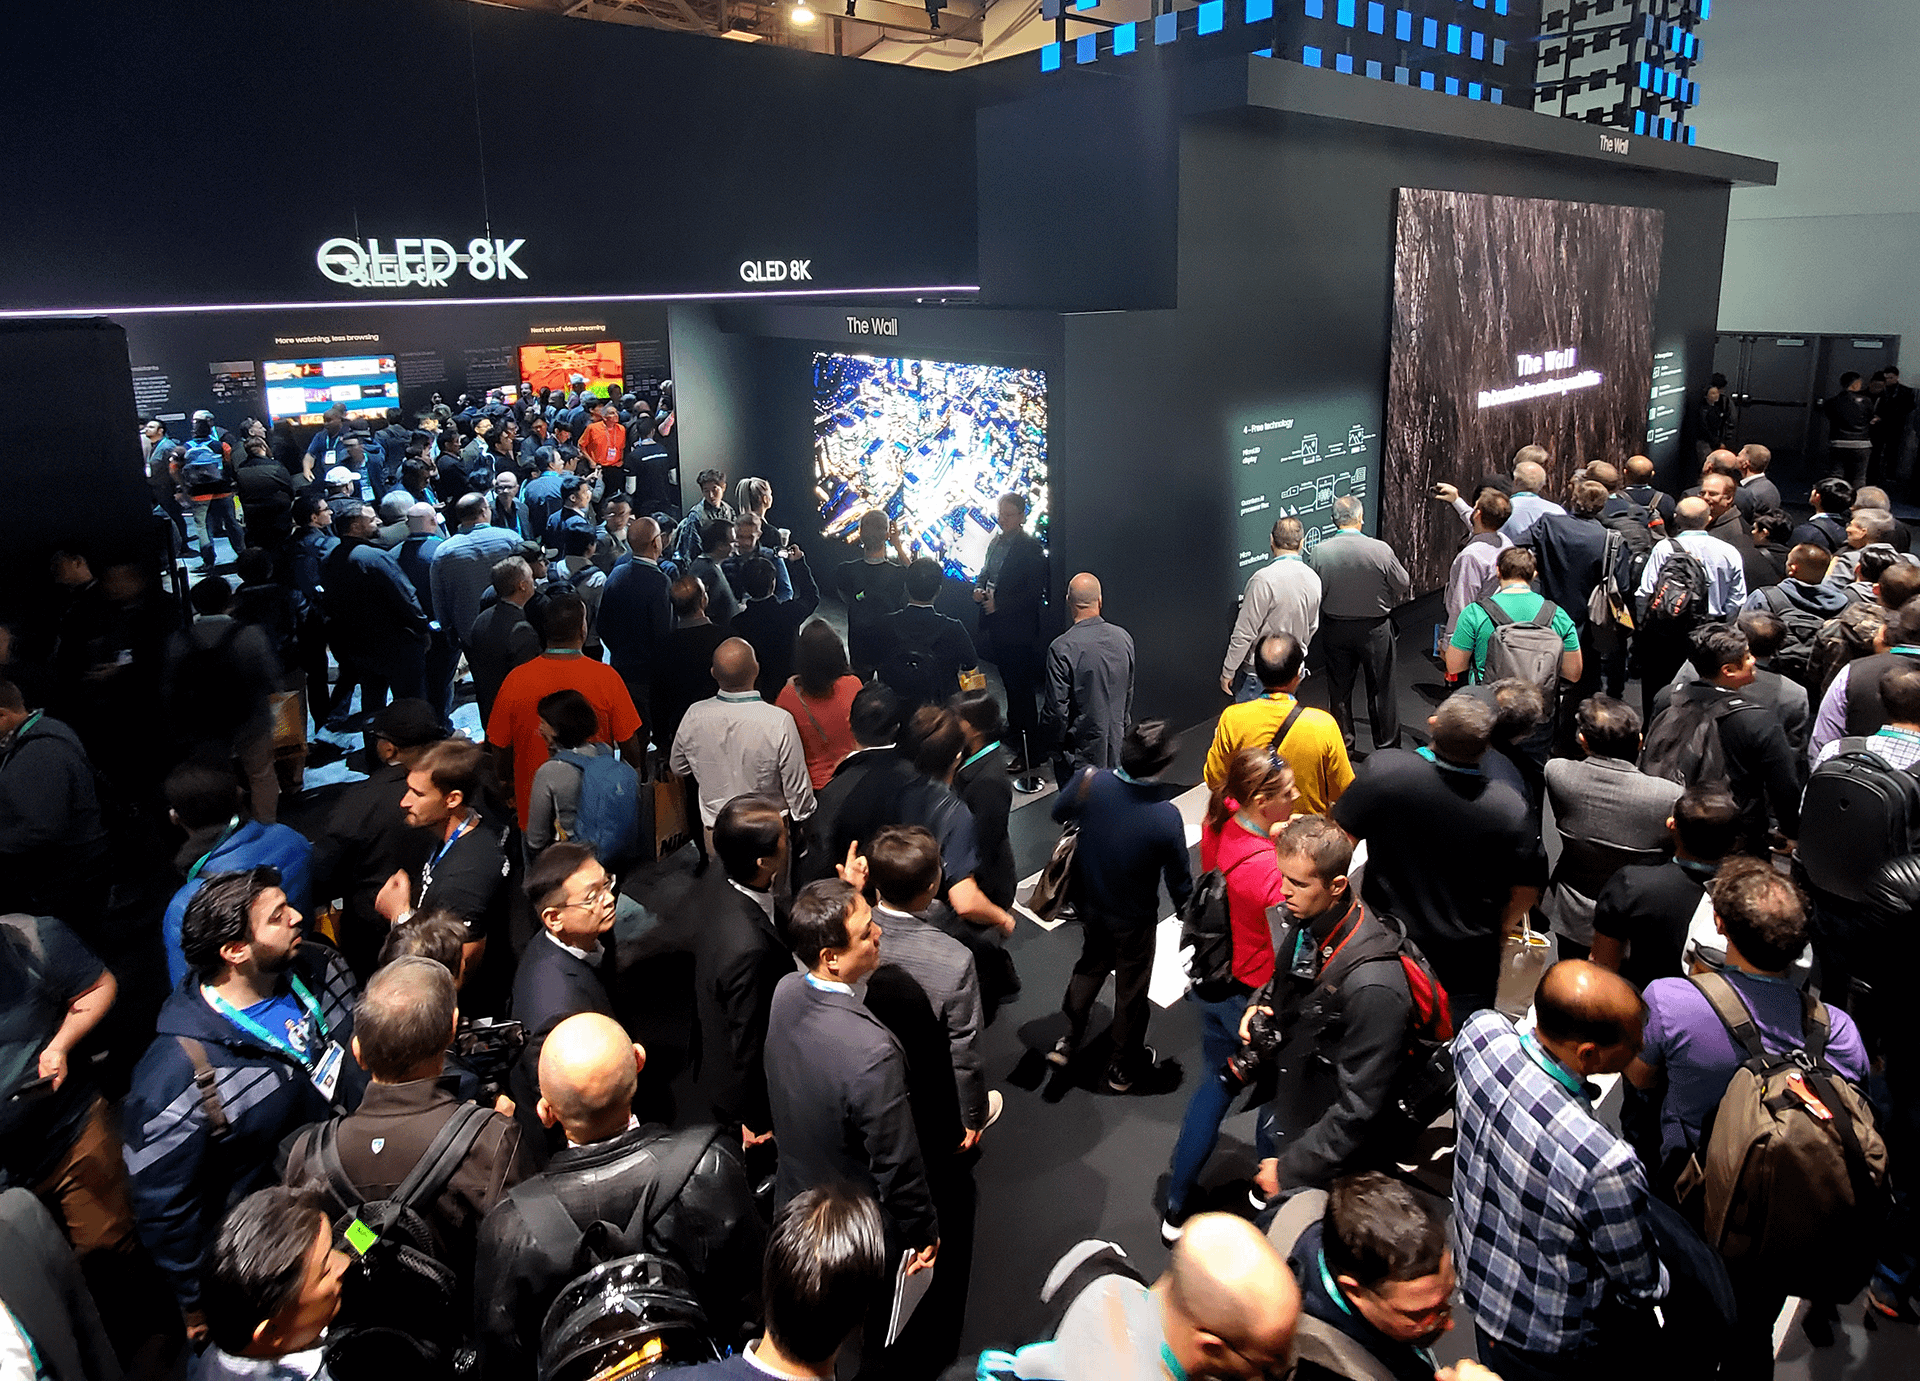 Big crowds gathered in Las Vegas are a defining feature of CES, is this approach still viable in 2022 and beyond?